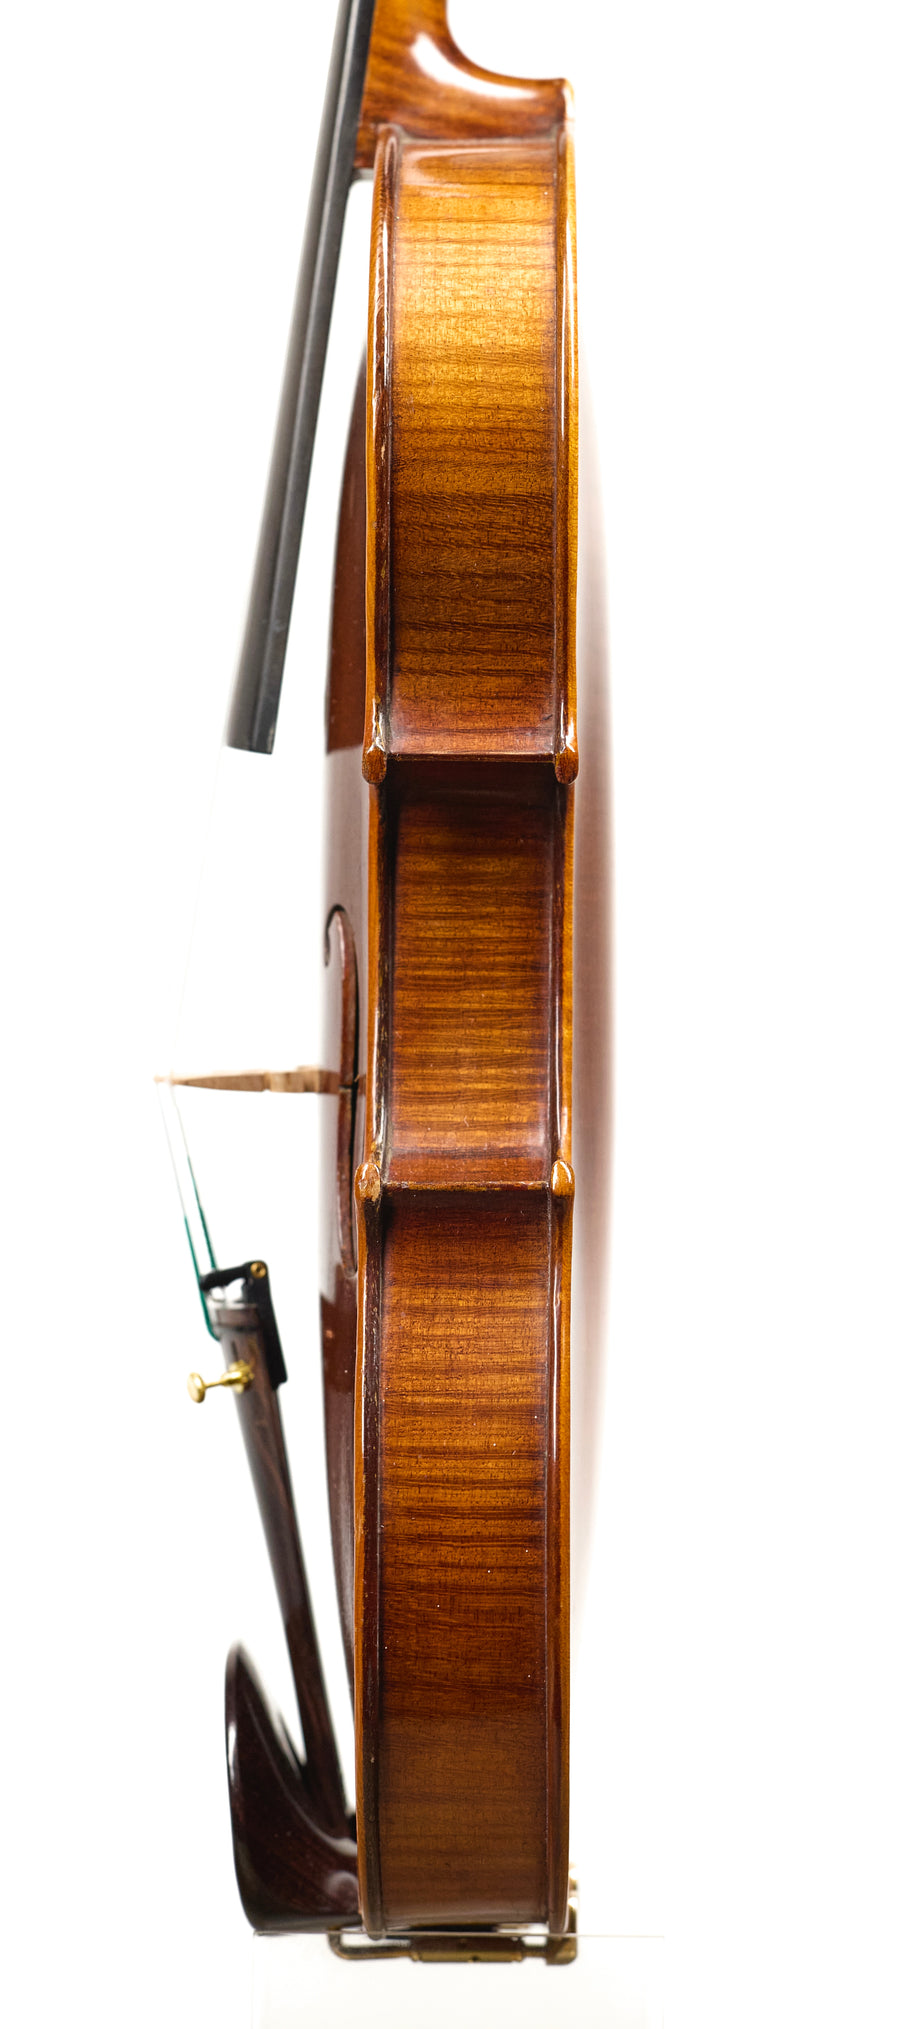 A French Violin By Francois Salzard, Between 1836 And About 1840.